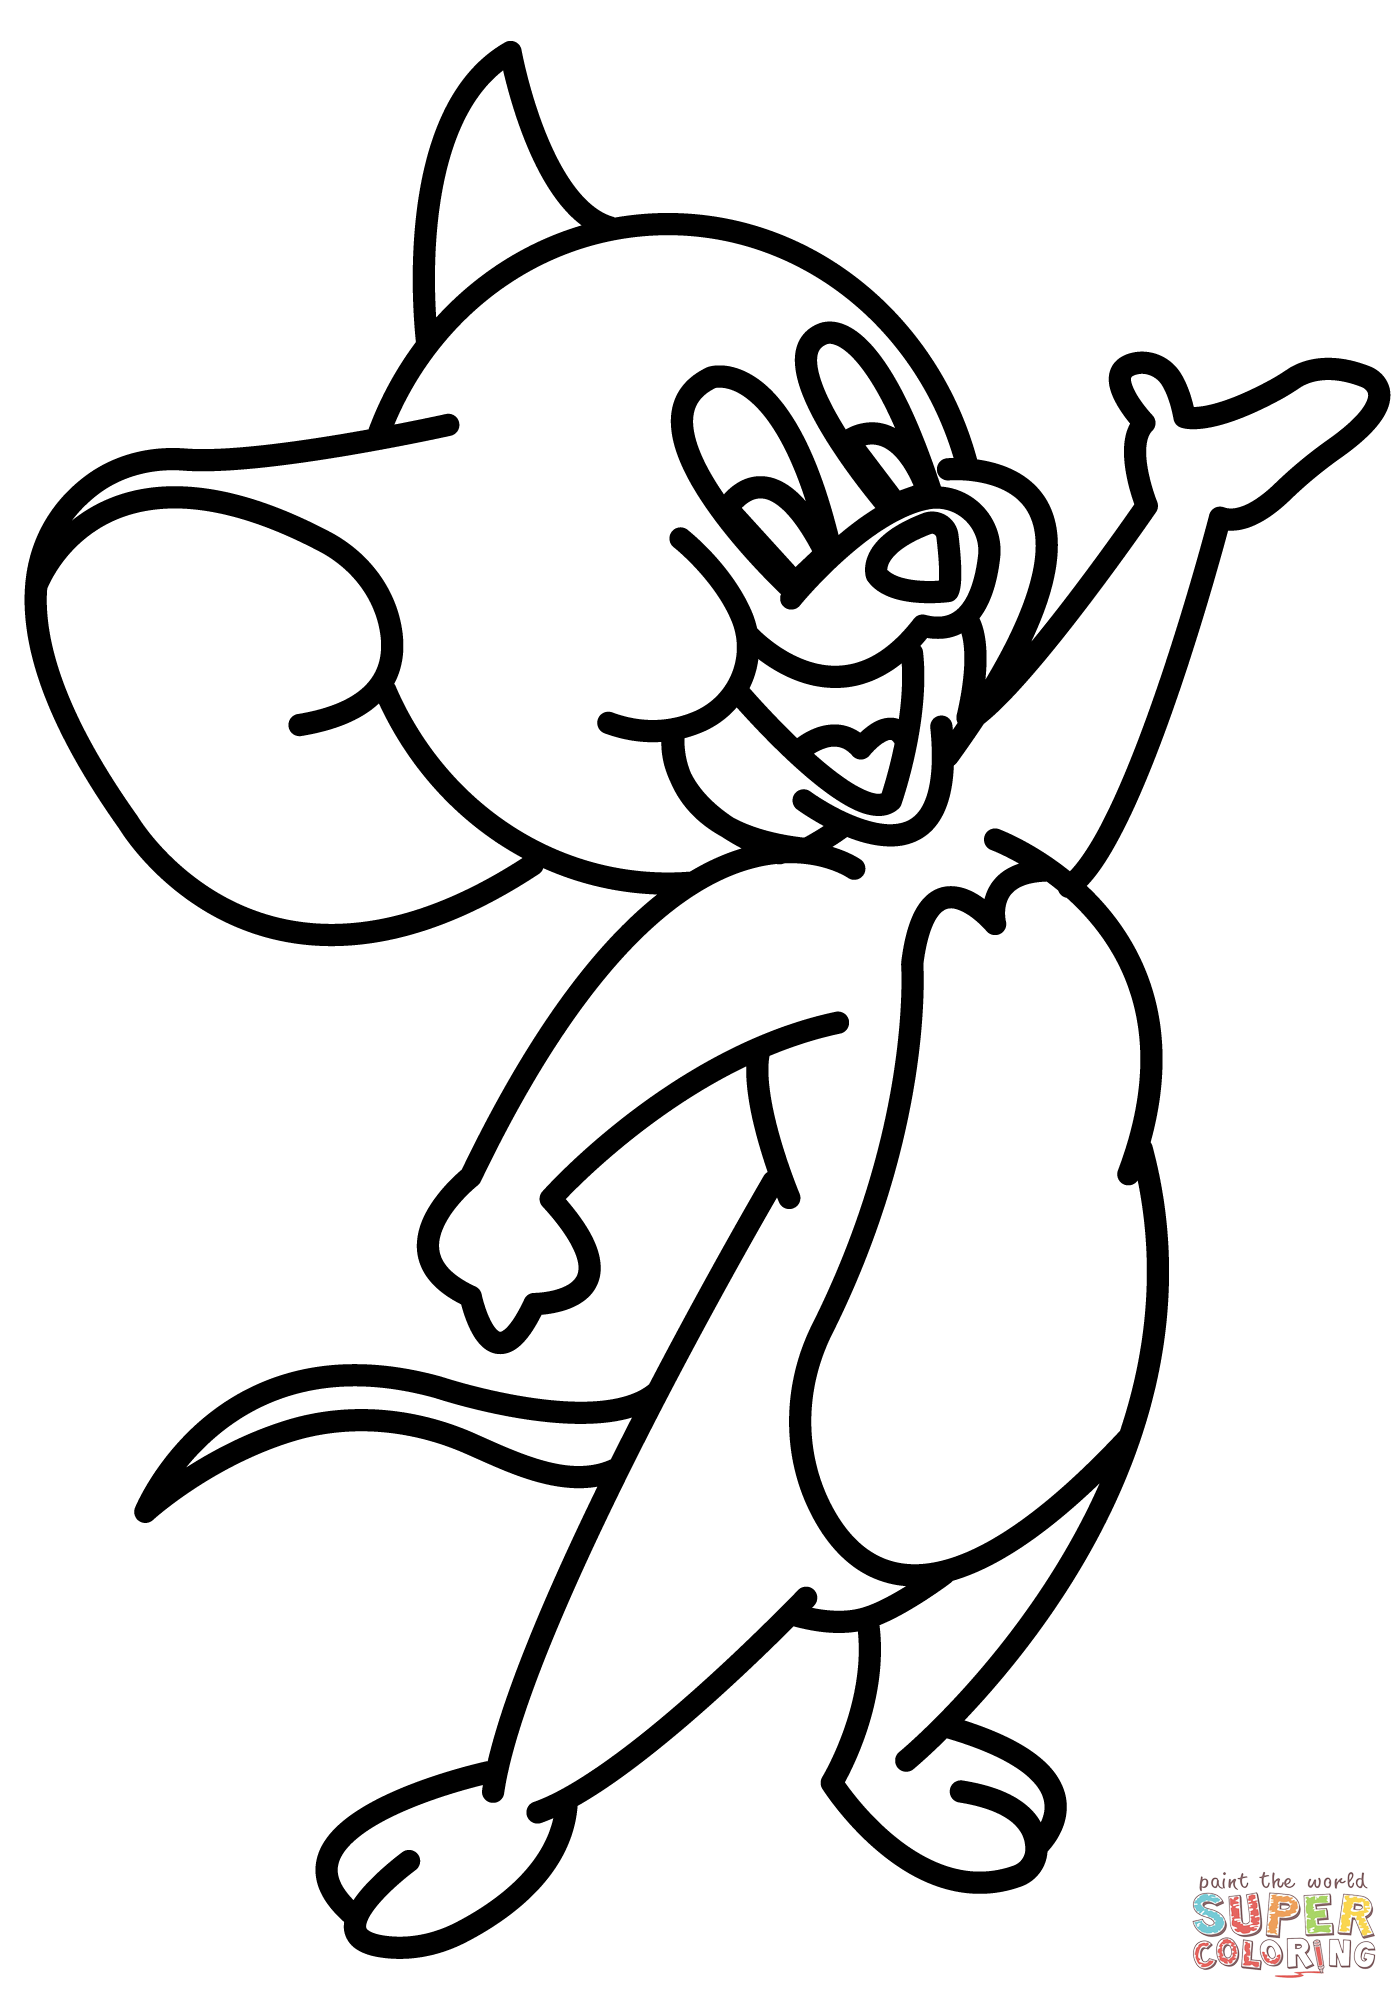 Chibi jerry mouse coloring page free printable coloring pages